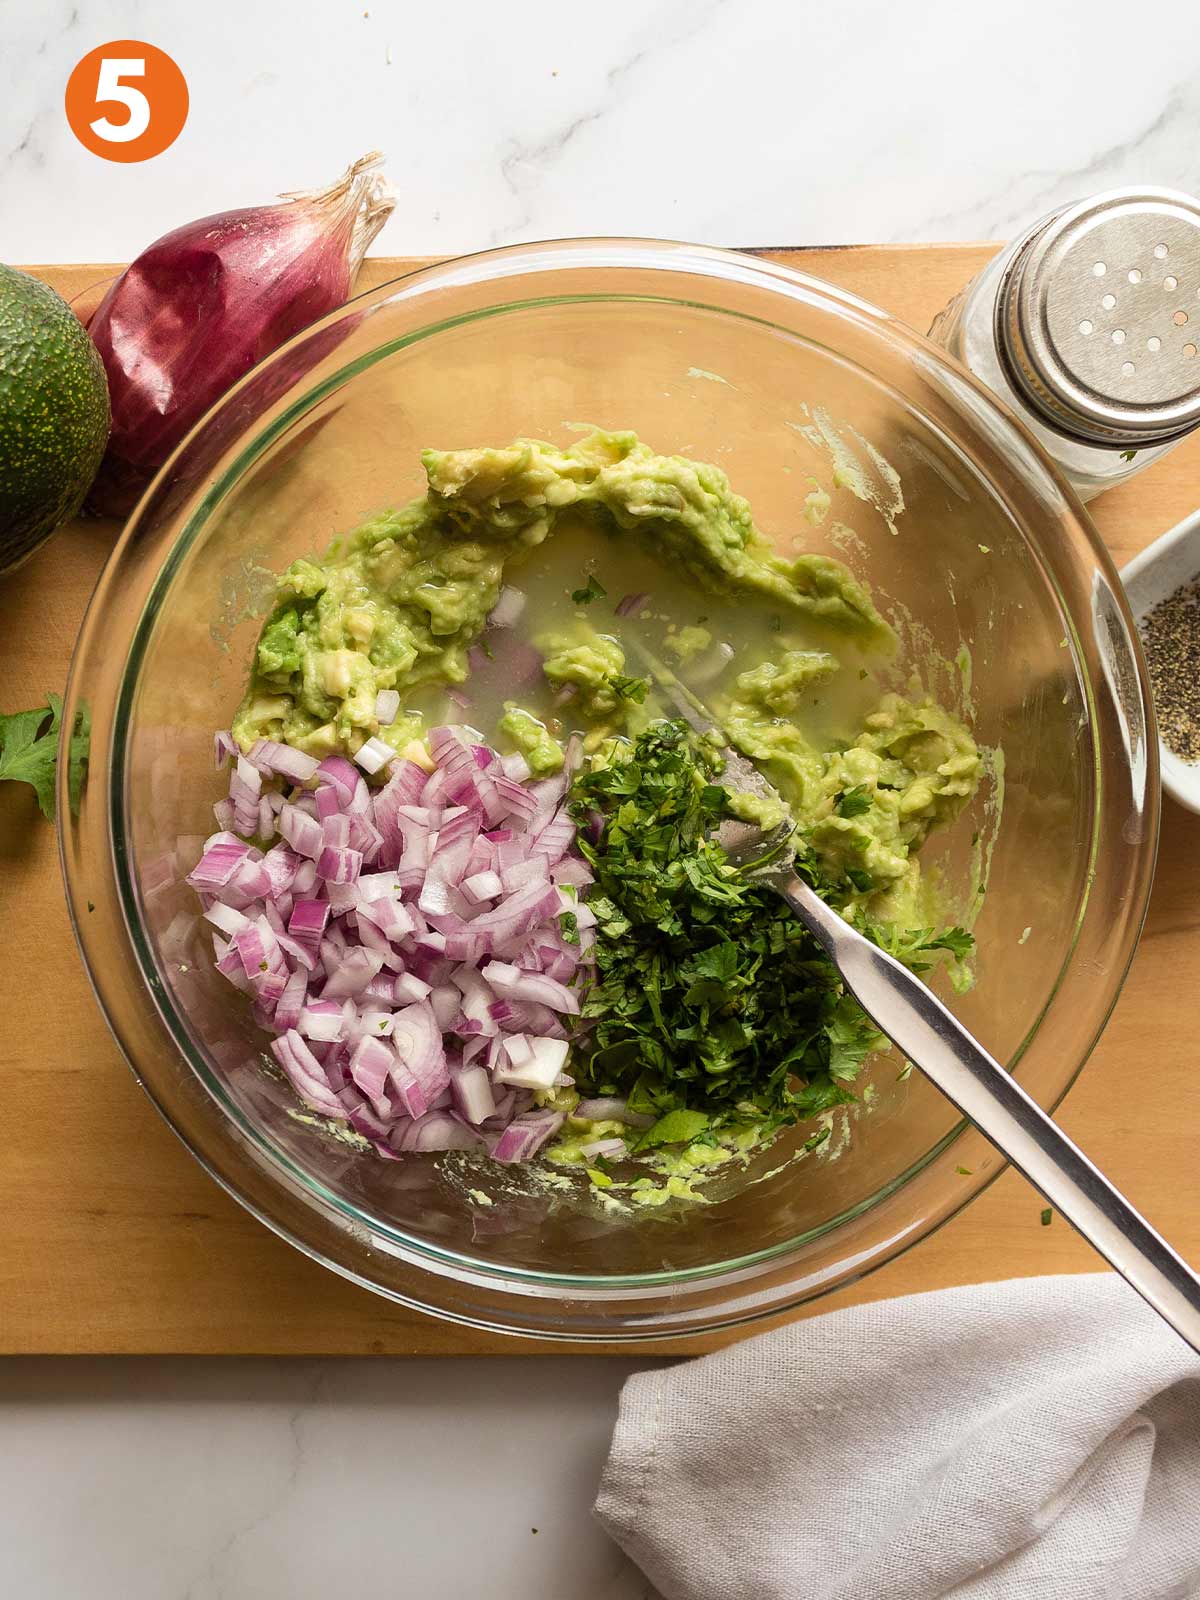 Four ingredients for guacamole in a bowl.